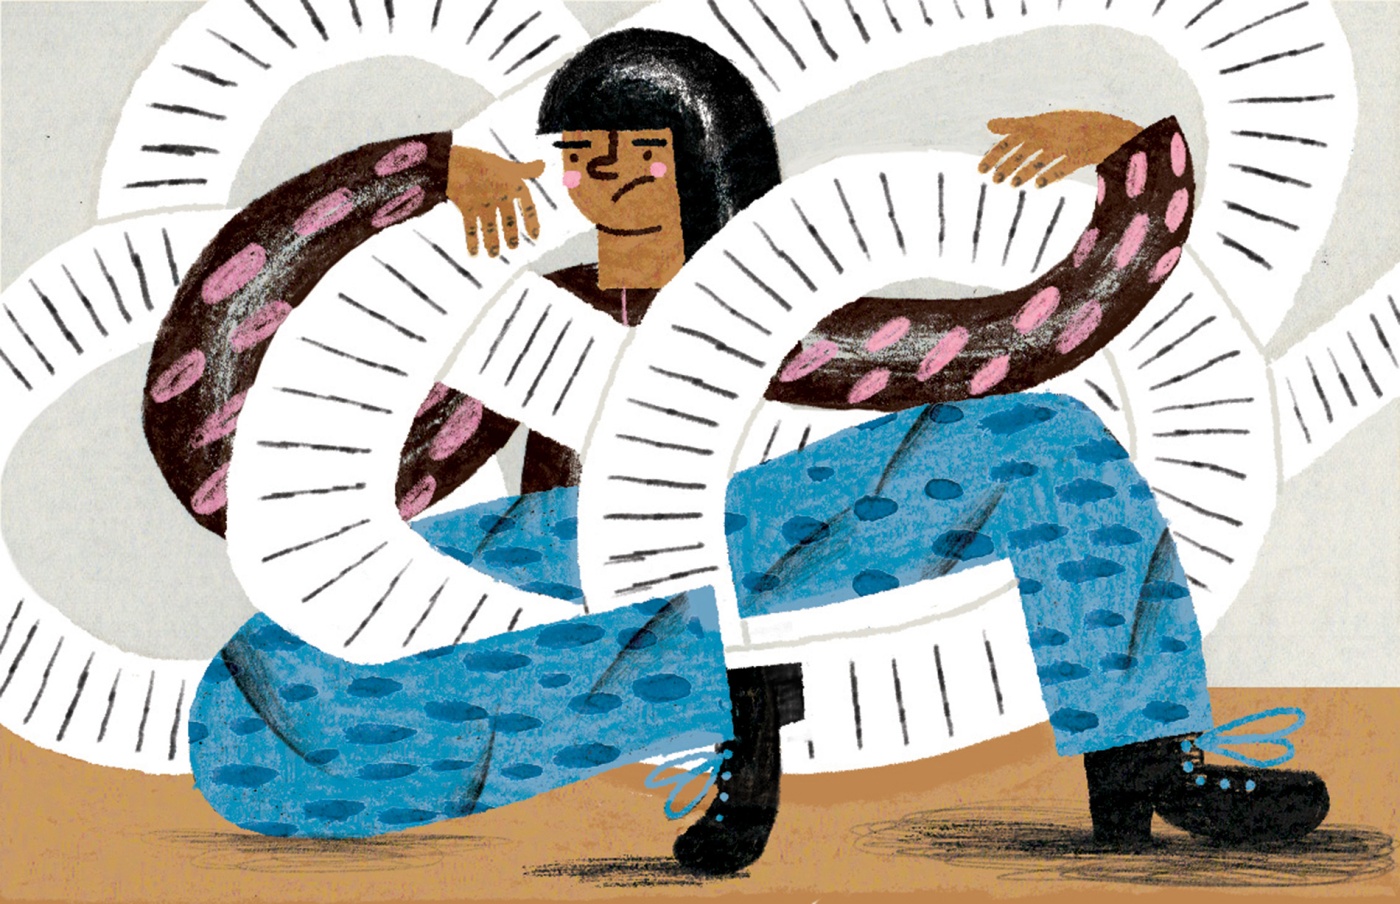 Illustration by Kasia Fryza of a person entangled in a roll of paper.